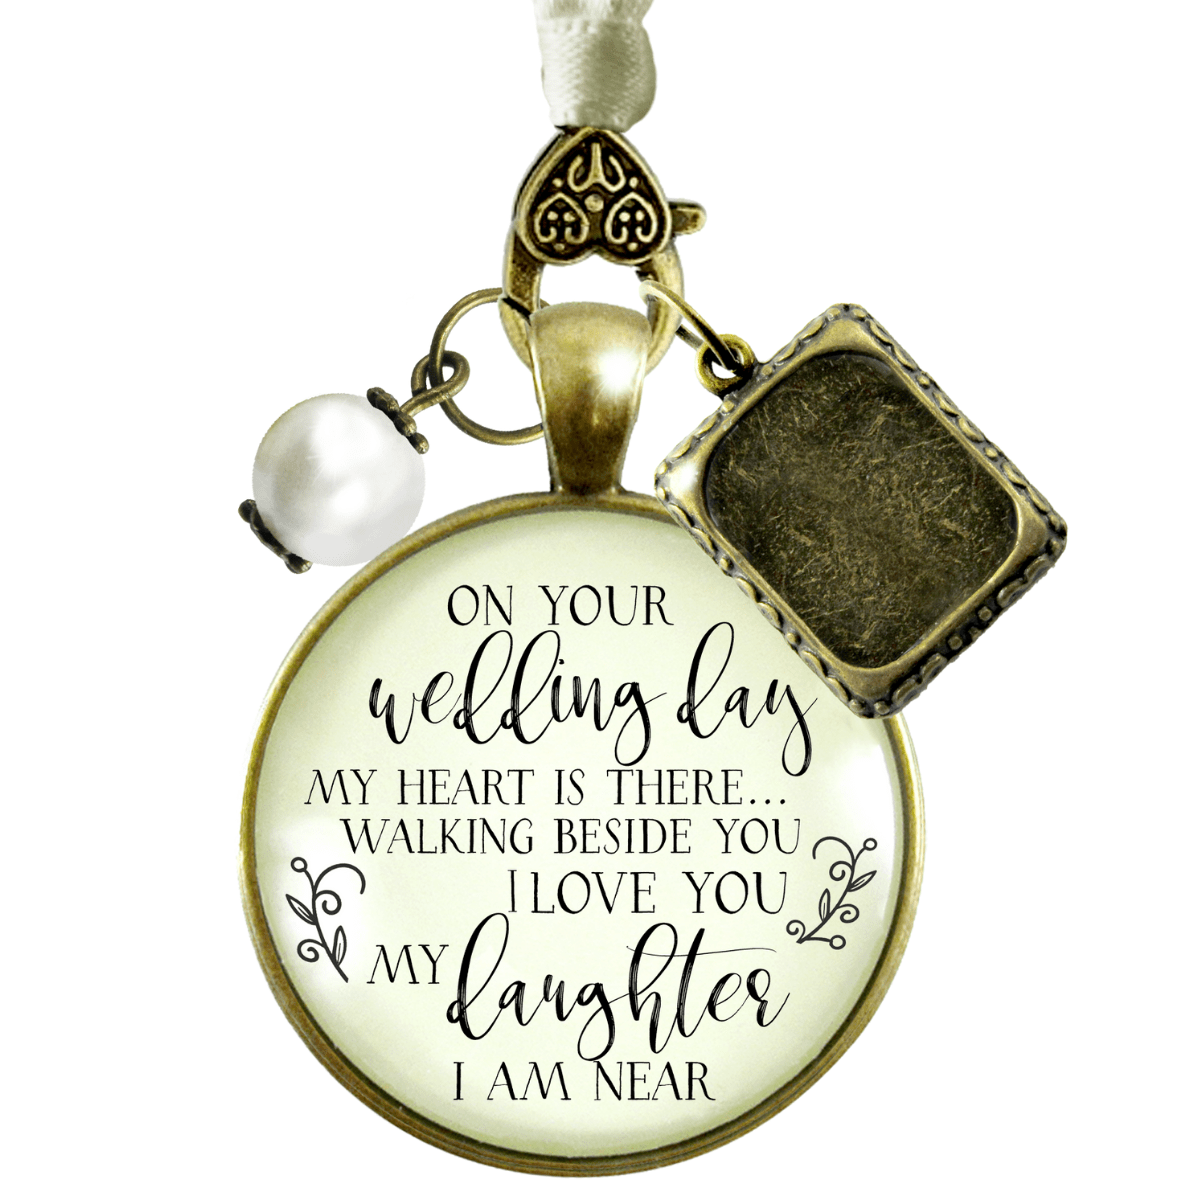 Bouquet Charm On Your Wedding Day Mom Dad Memorial Bridal Memorial Custom Photo Frame - Gutsy Goodness Handmade Jewelry Gifts